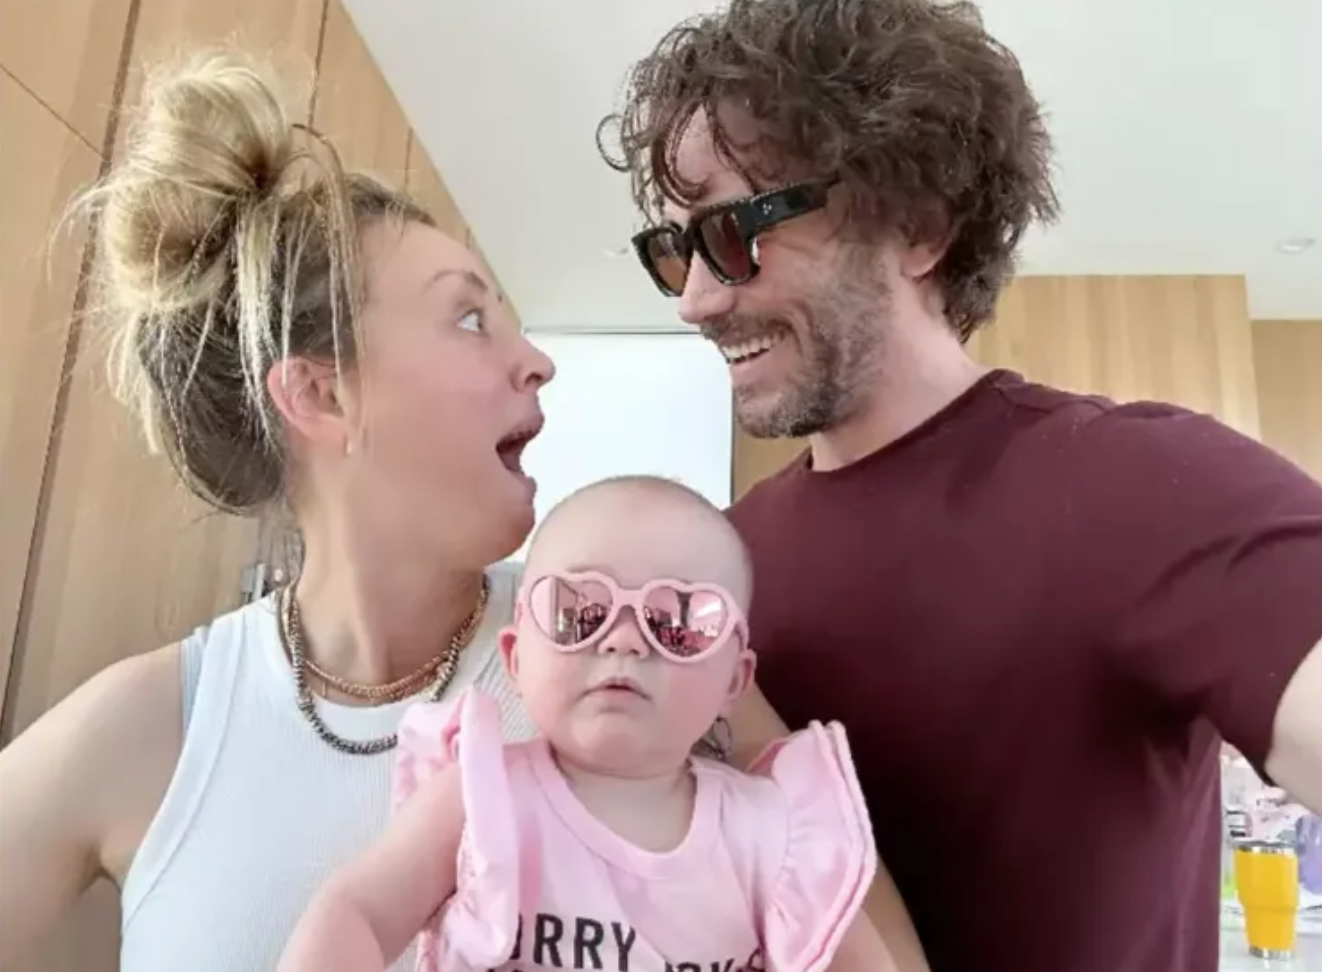 Kaley Cuoco’s Baby Daughter Looks ‘Too Cool’ In Sunglasses In Adorable Family Photo